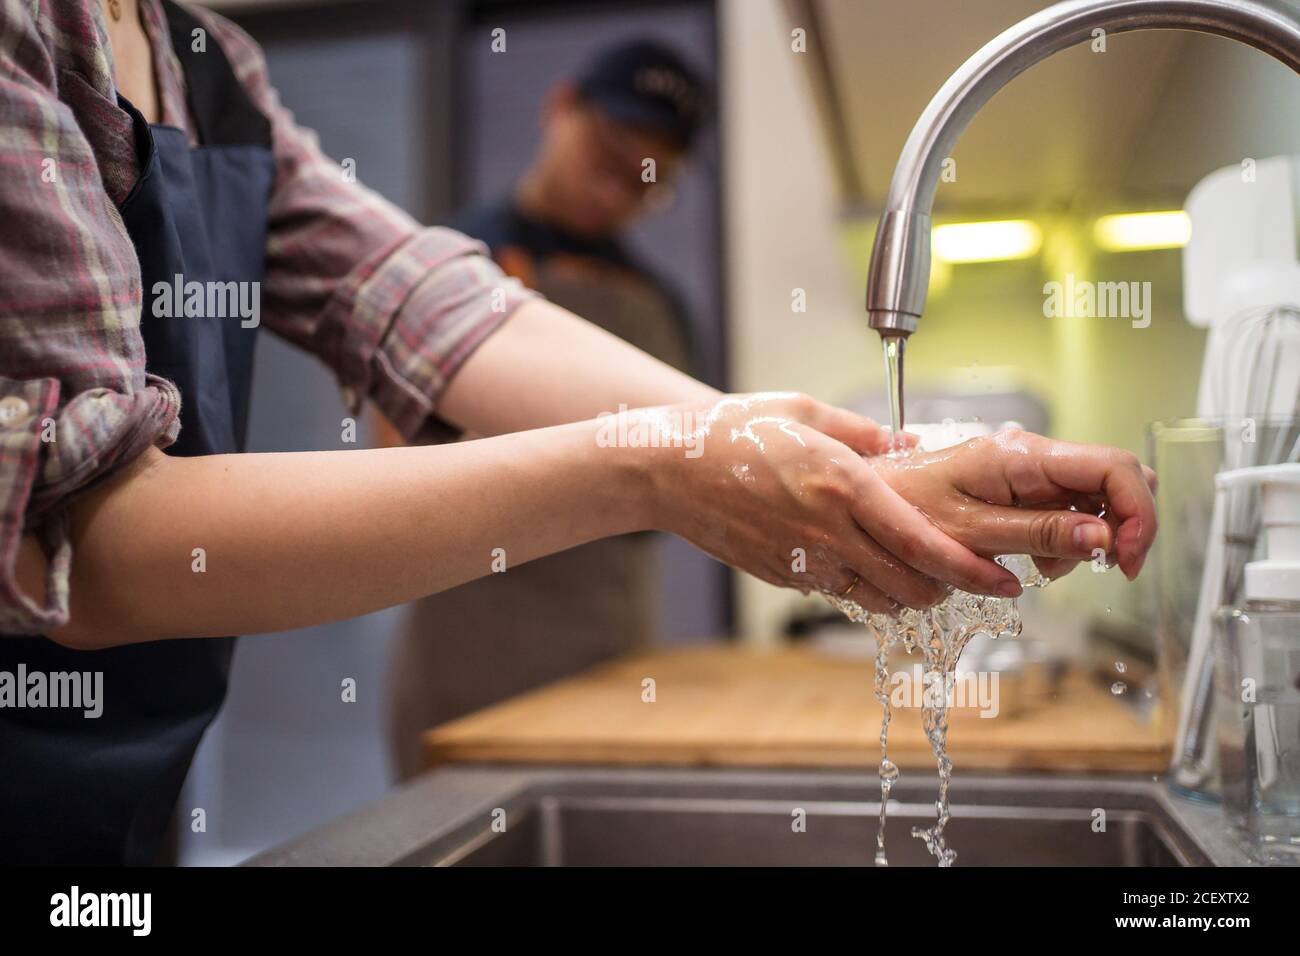 Cropped side view of Woman washing hands in sink while having home bakery with man Stock Photo